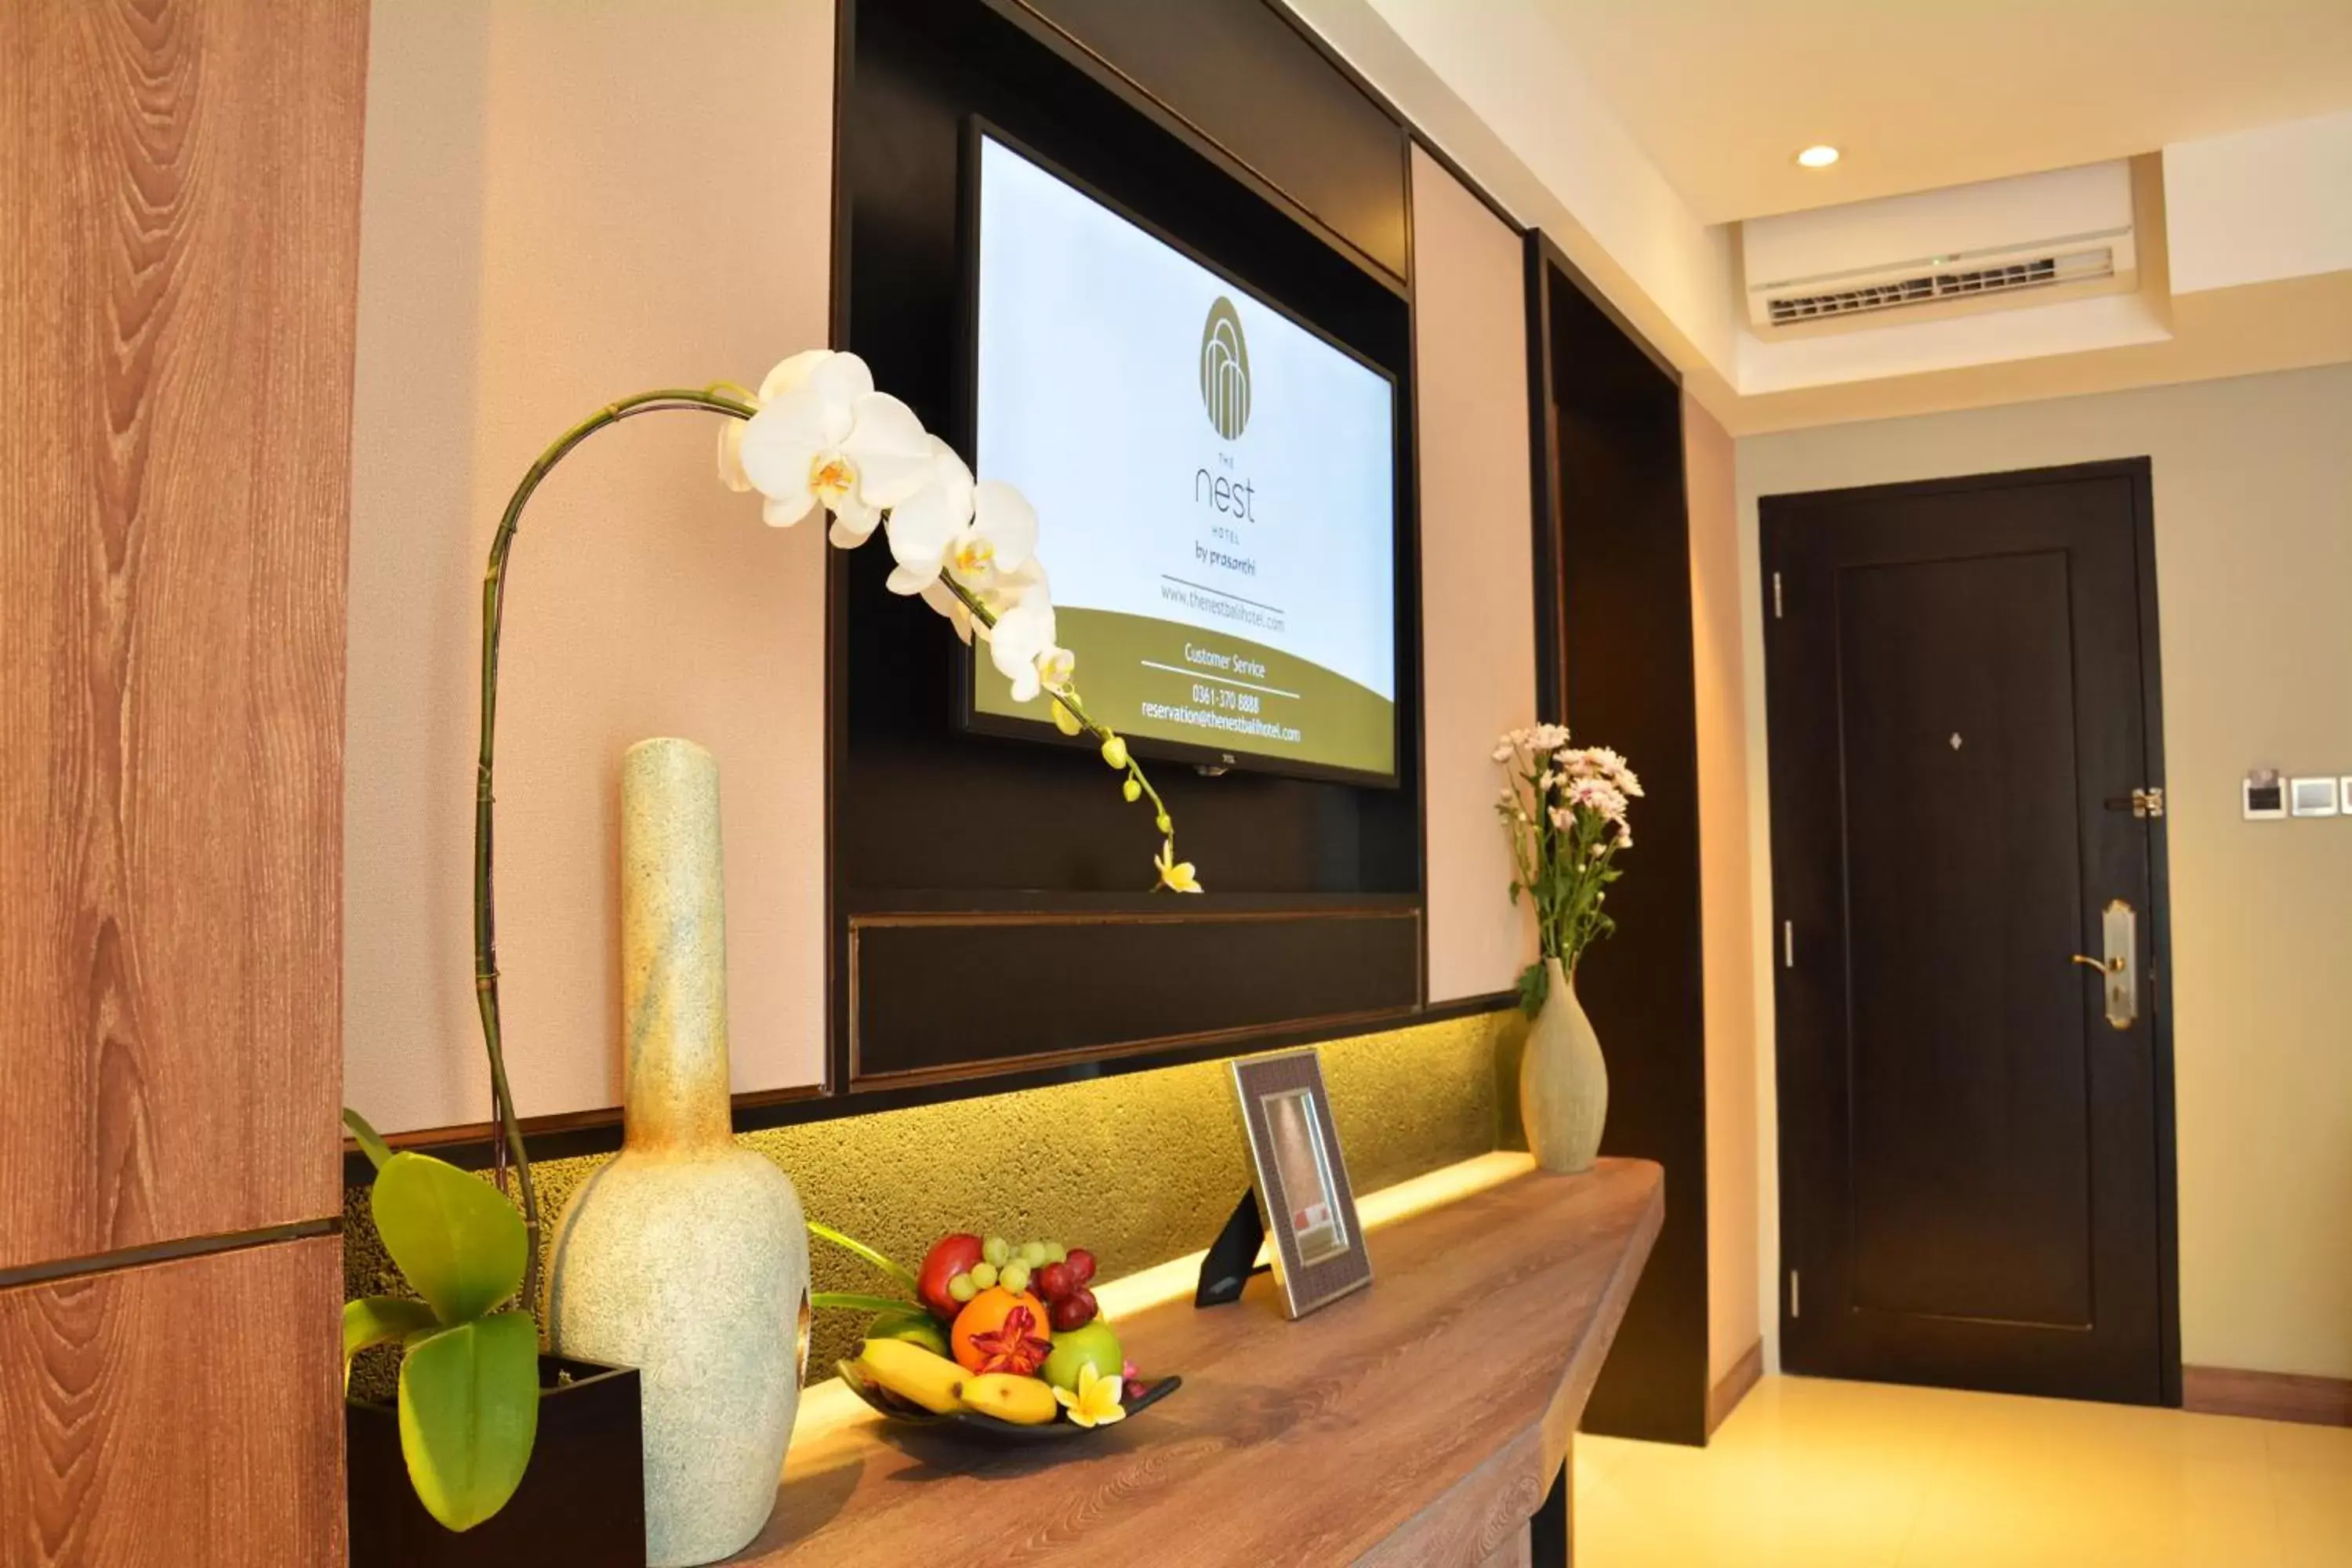 TV and multimedia, Lobby/Reception in The Nest Hotel Nusa Dua